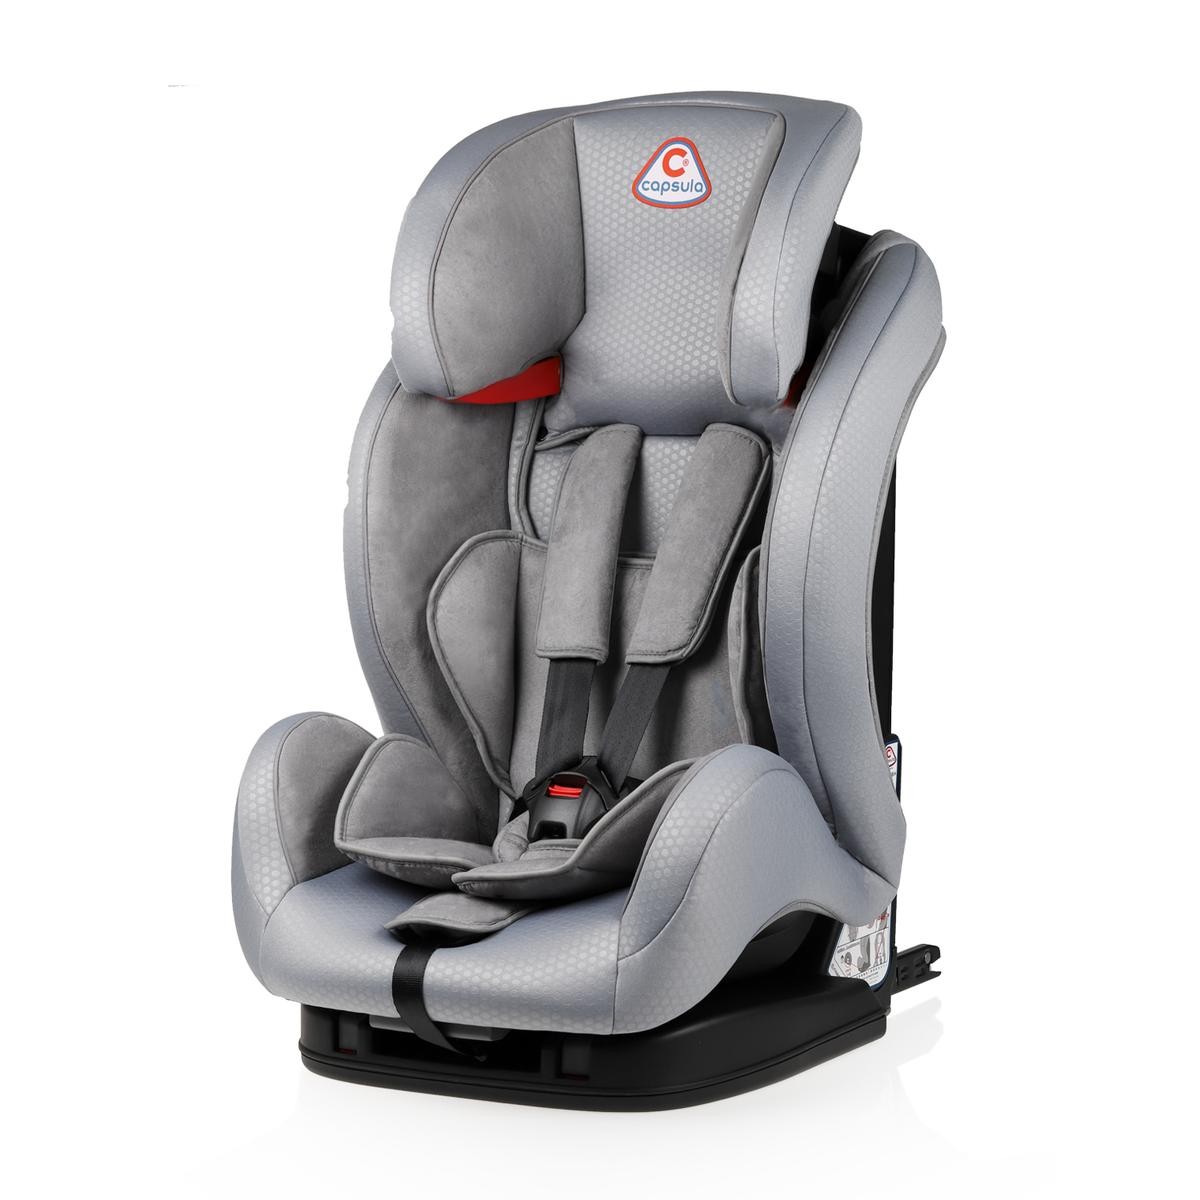 capsula 771120 Kids car seat FIAT PUNTO (188) with Isofix, Group 1/2/3, 9-36 kg, 5-point harness, 650 x 500 x 450, grey, multi-group